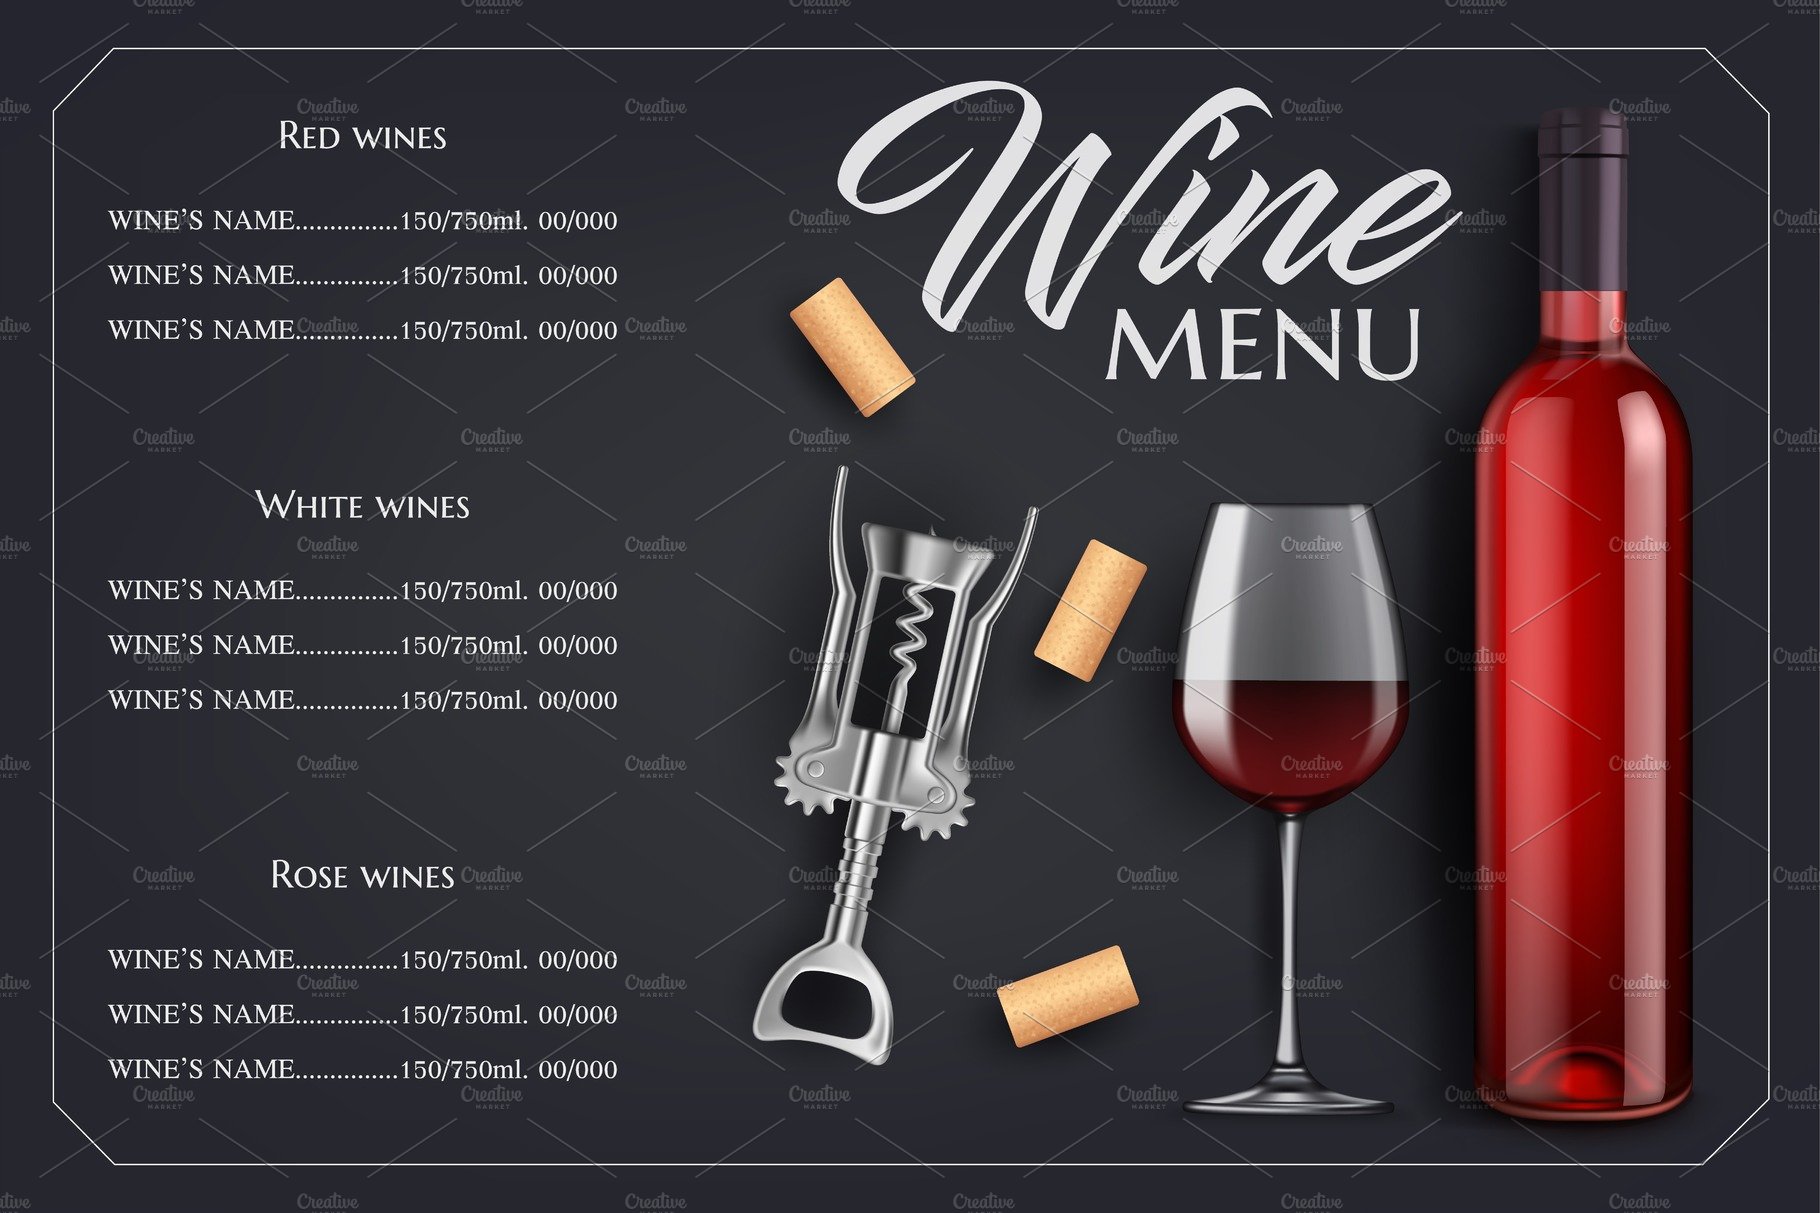 Wine menu list with bottle, glass cover image.